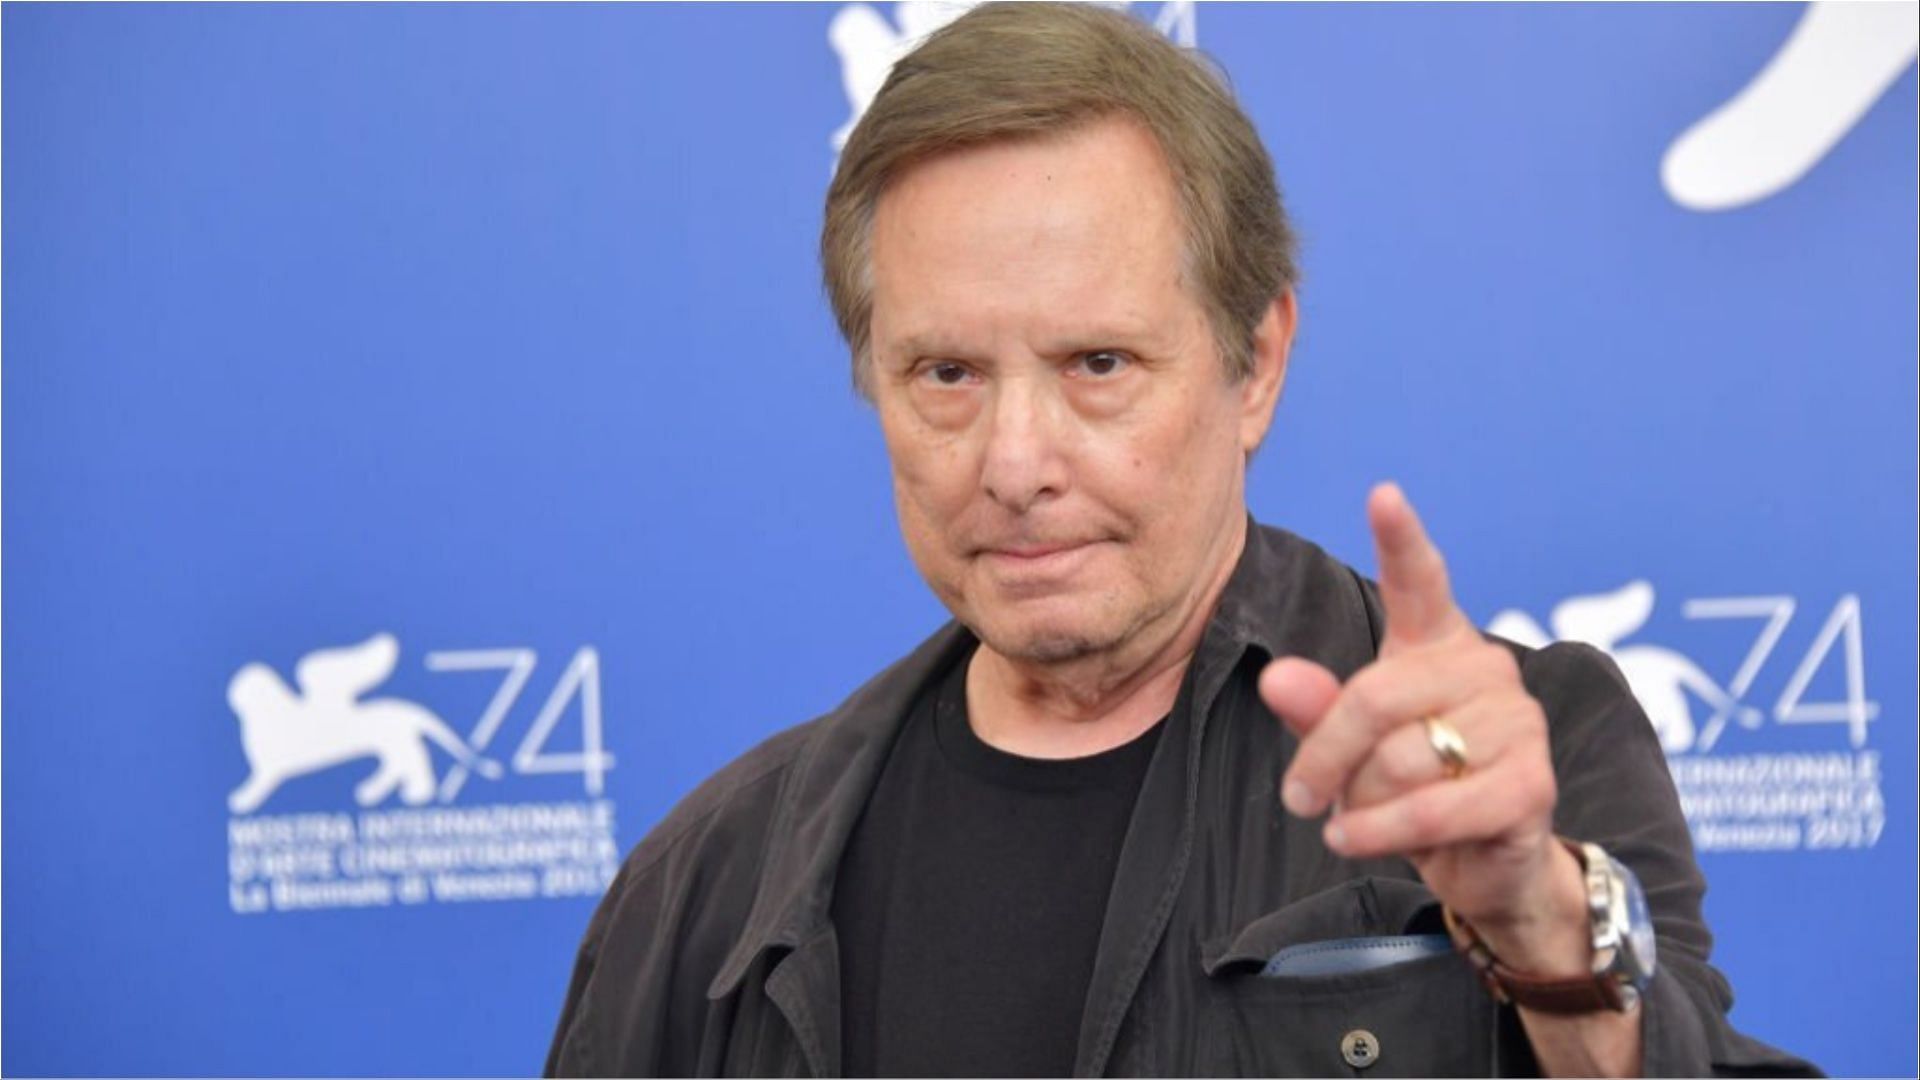 William Friedkin recently died at the age of 87 (Image via Dominique Charriau/Getty Images)